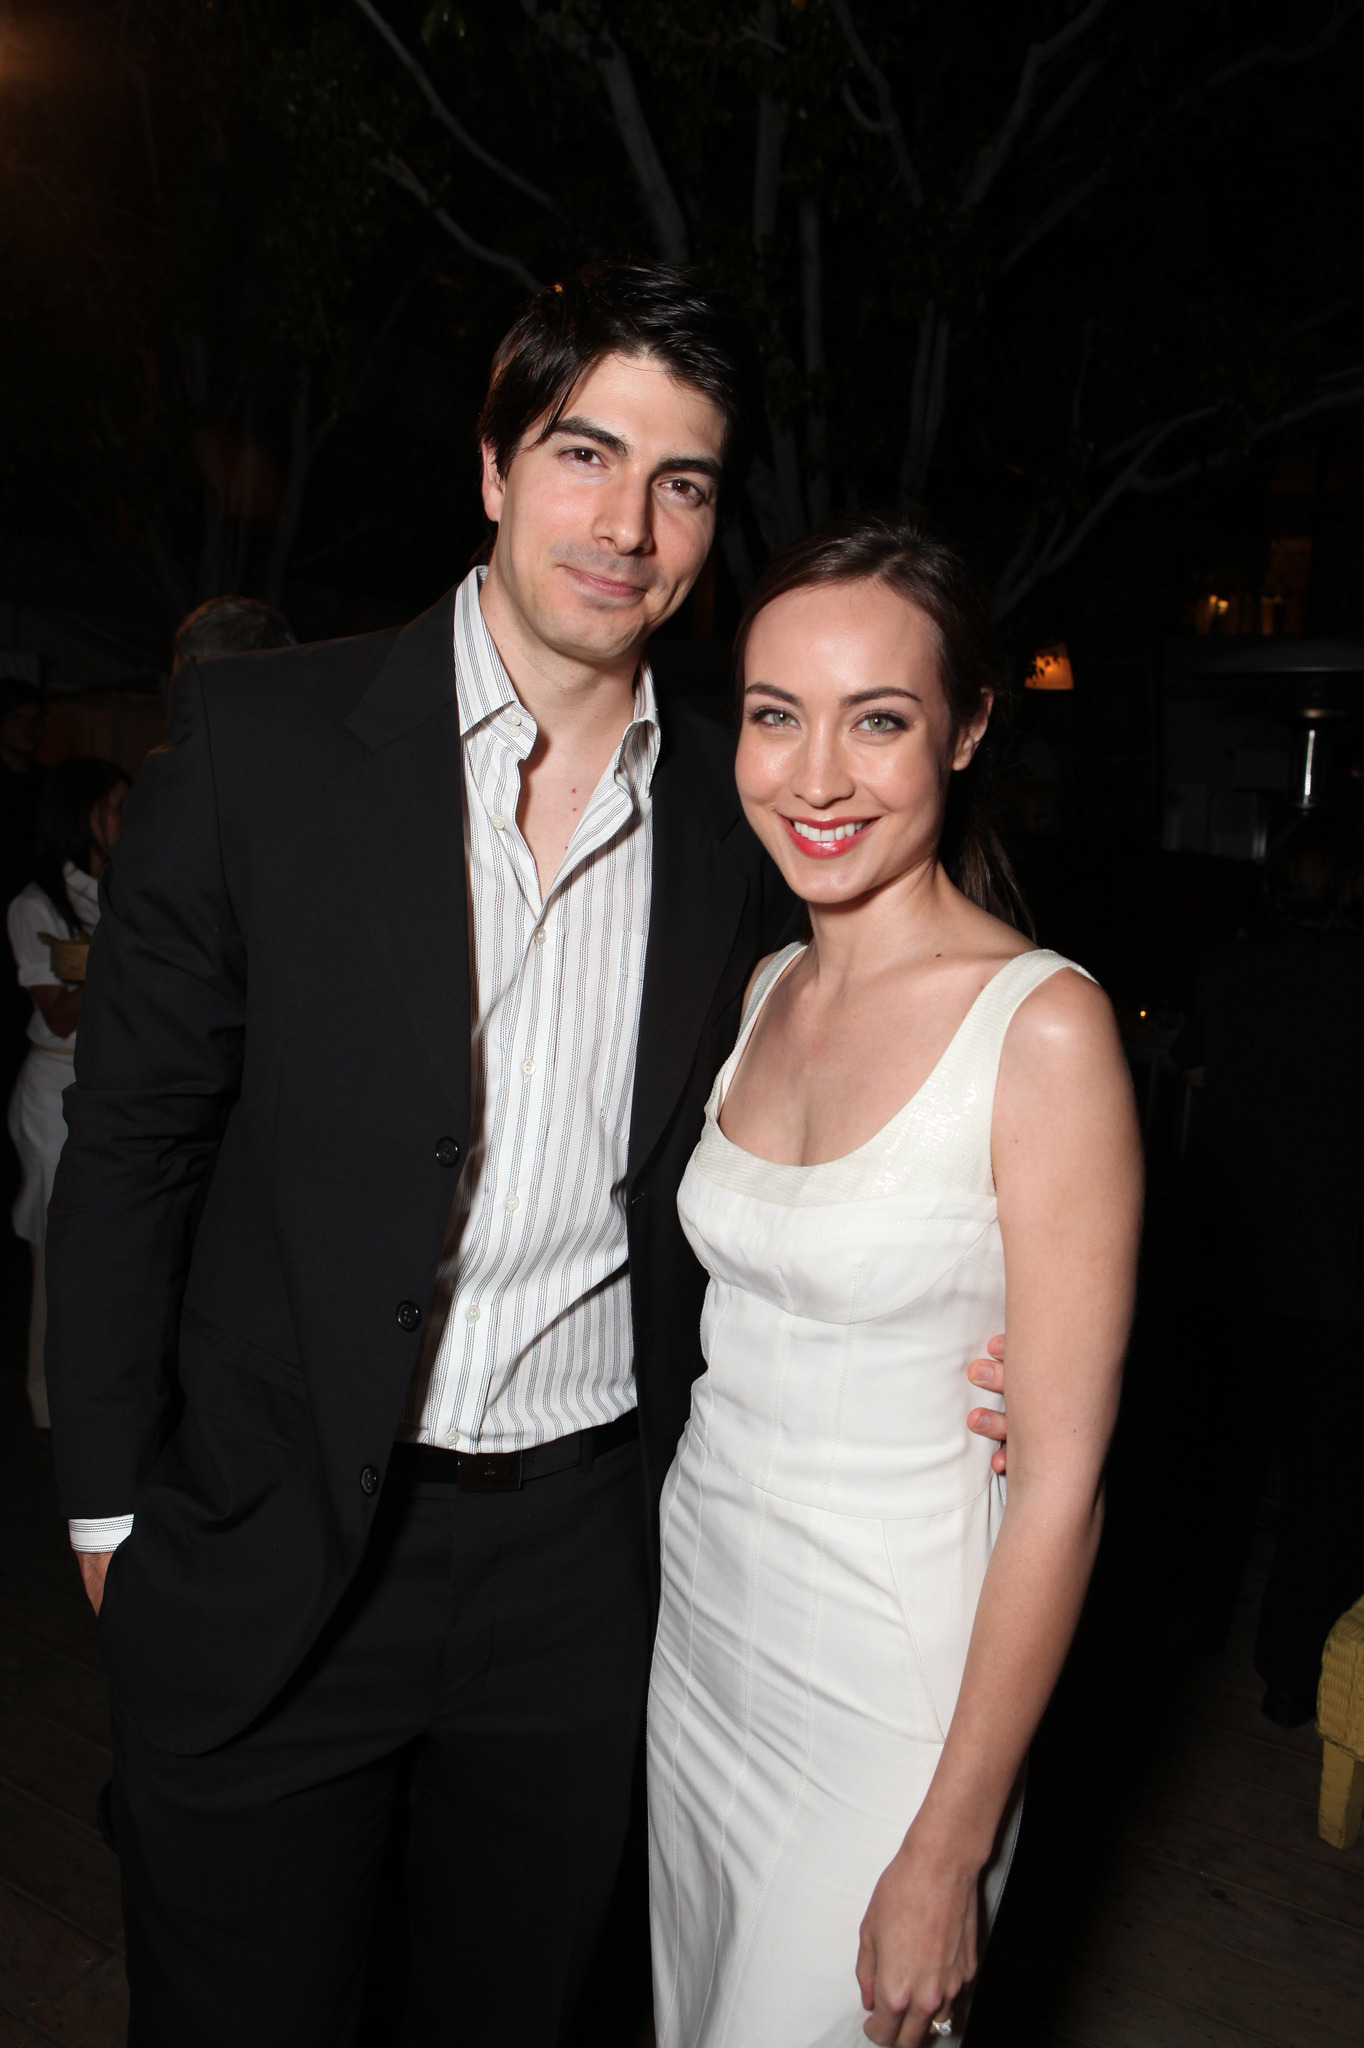 Brandon Routh and Courtney Ford